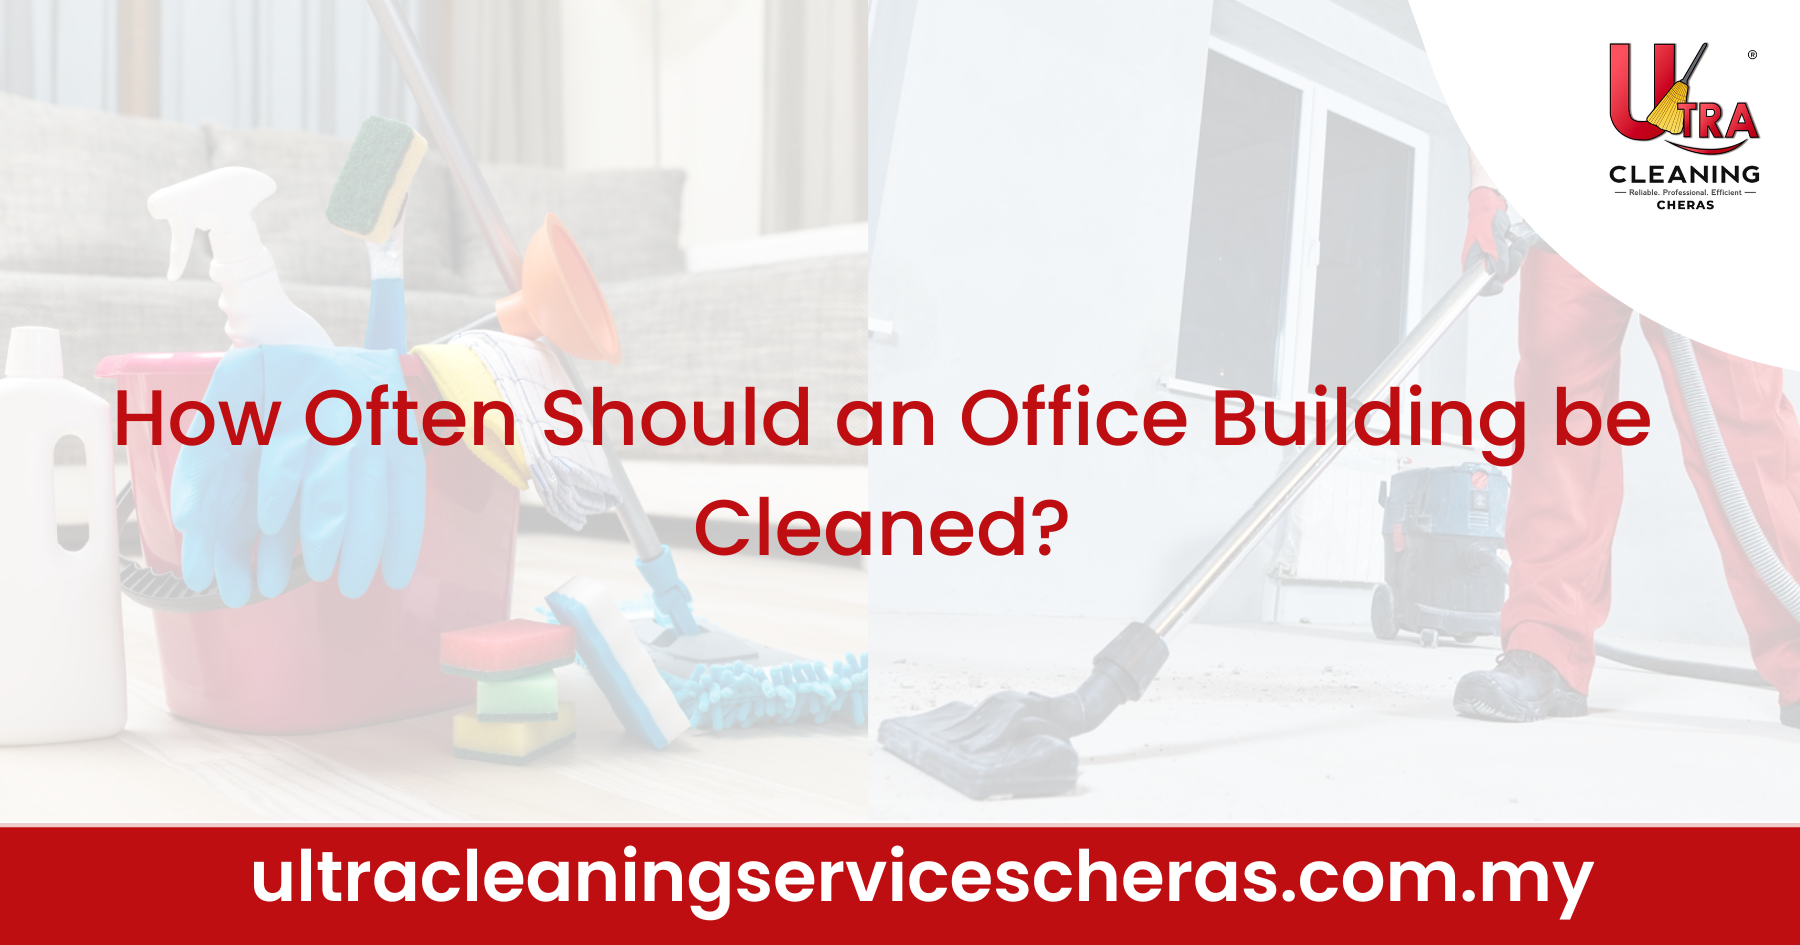 How Often Should an Office Building be Cleaned?